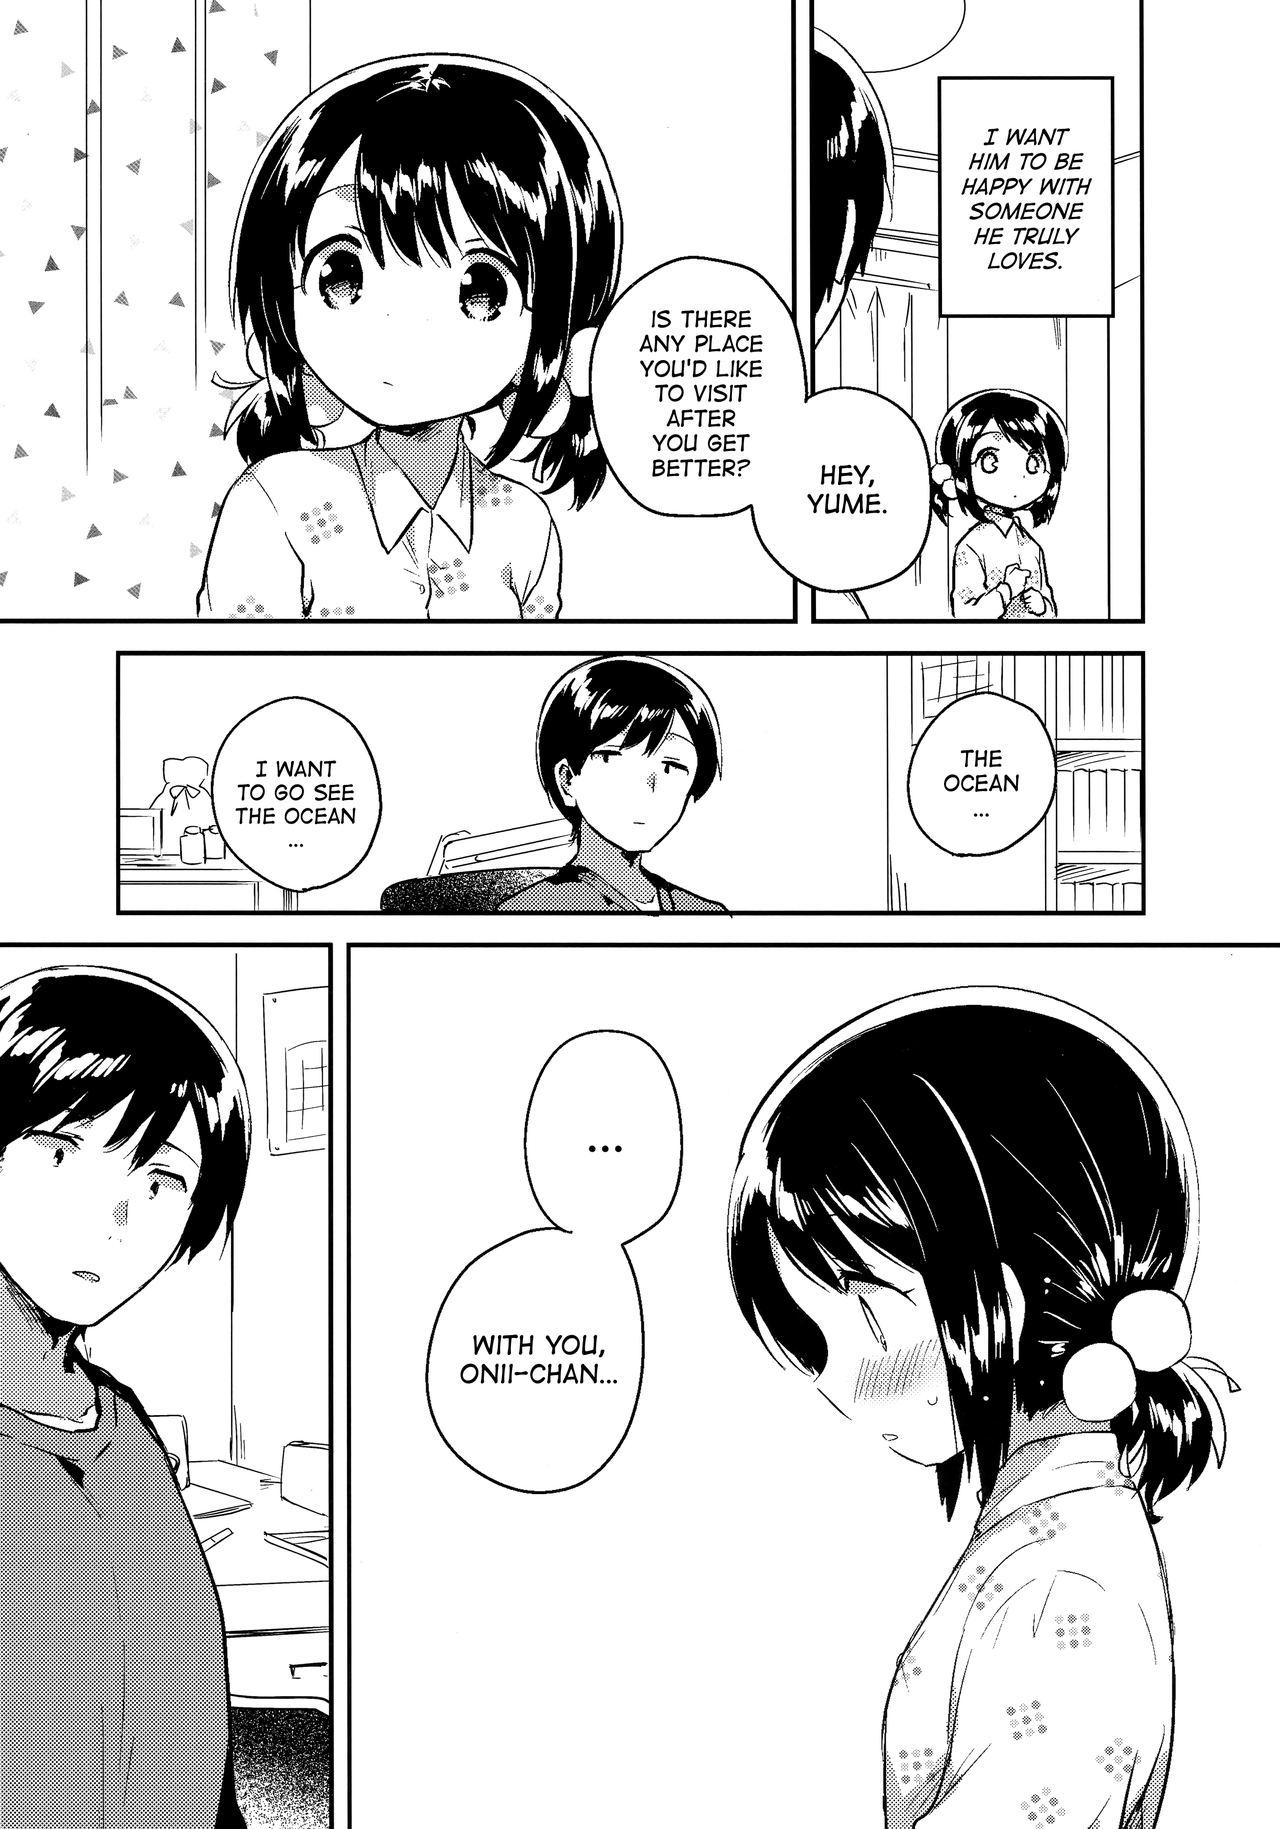 Footjob Imouto wa Sickness no Omake | My Little Sister is Sickly: Extra Story Fudendo - Page 7